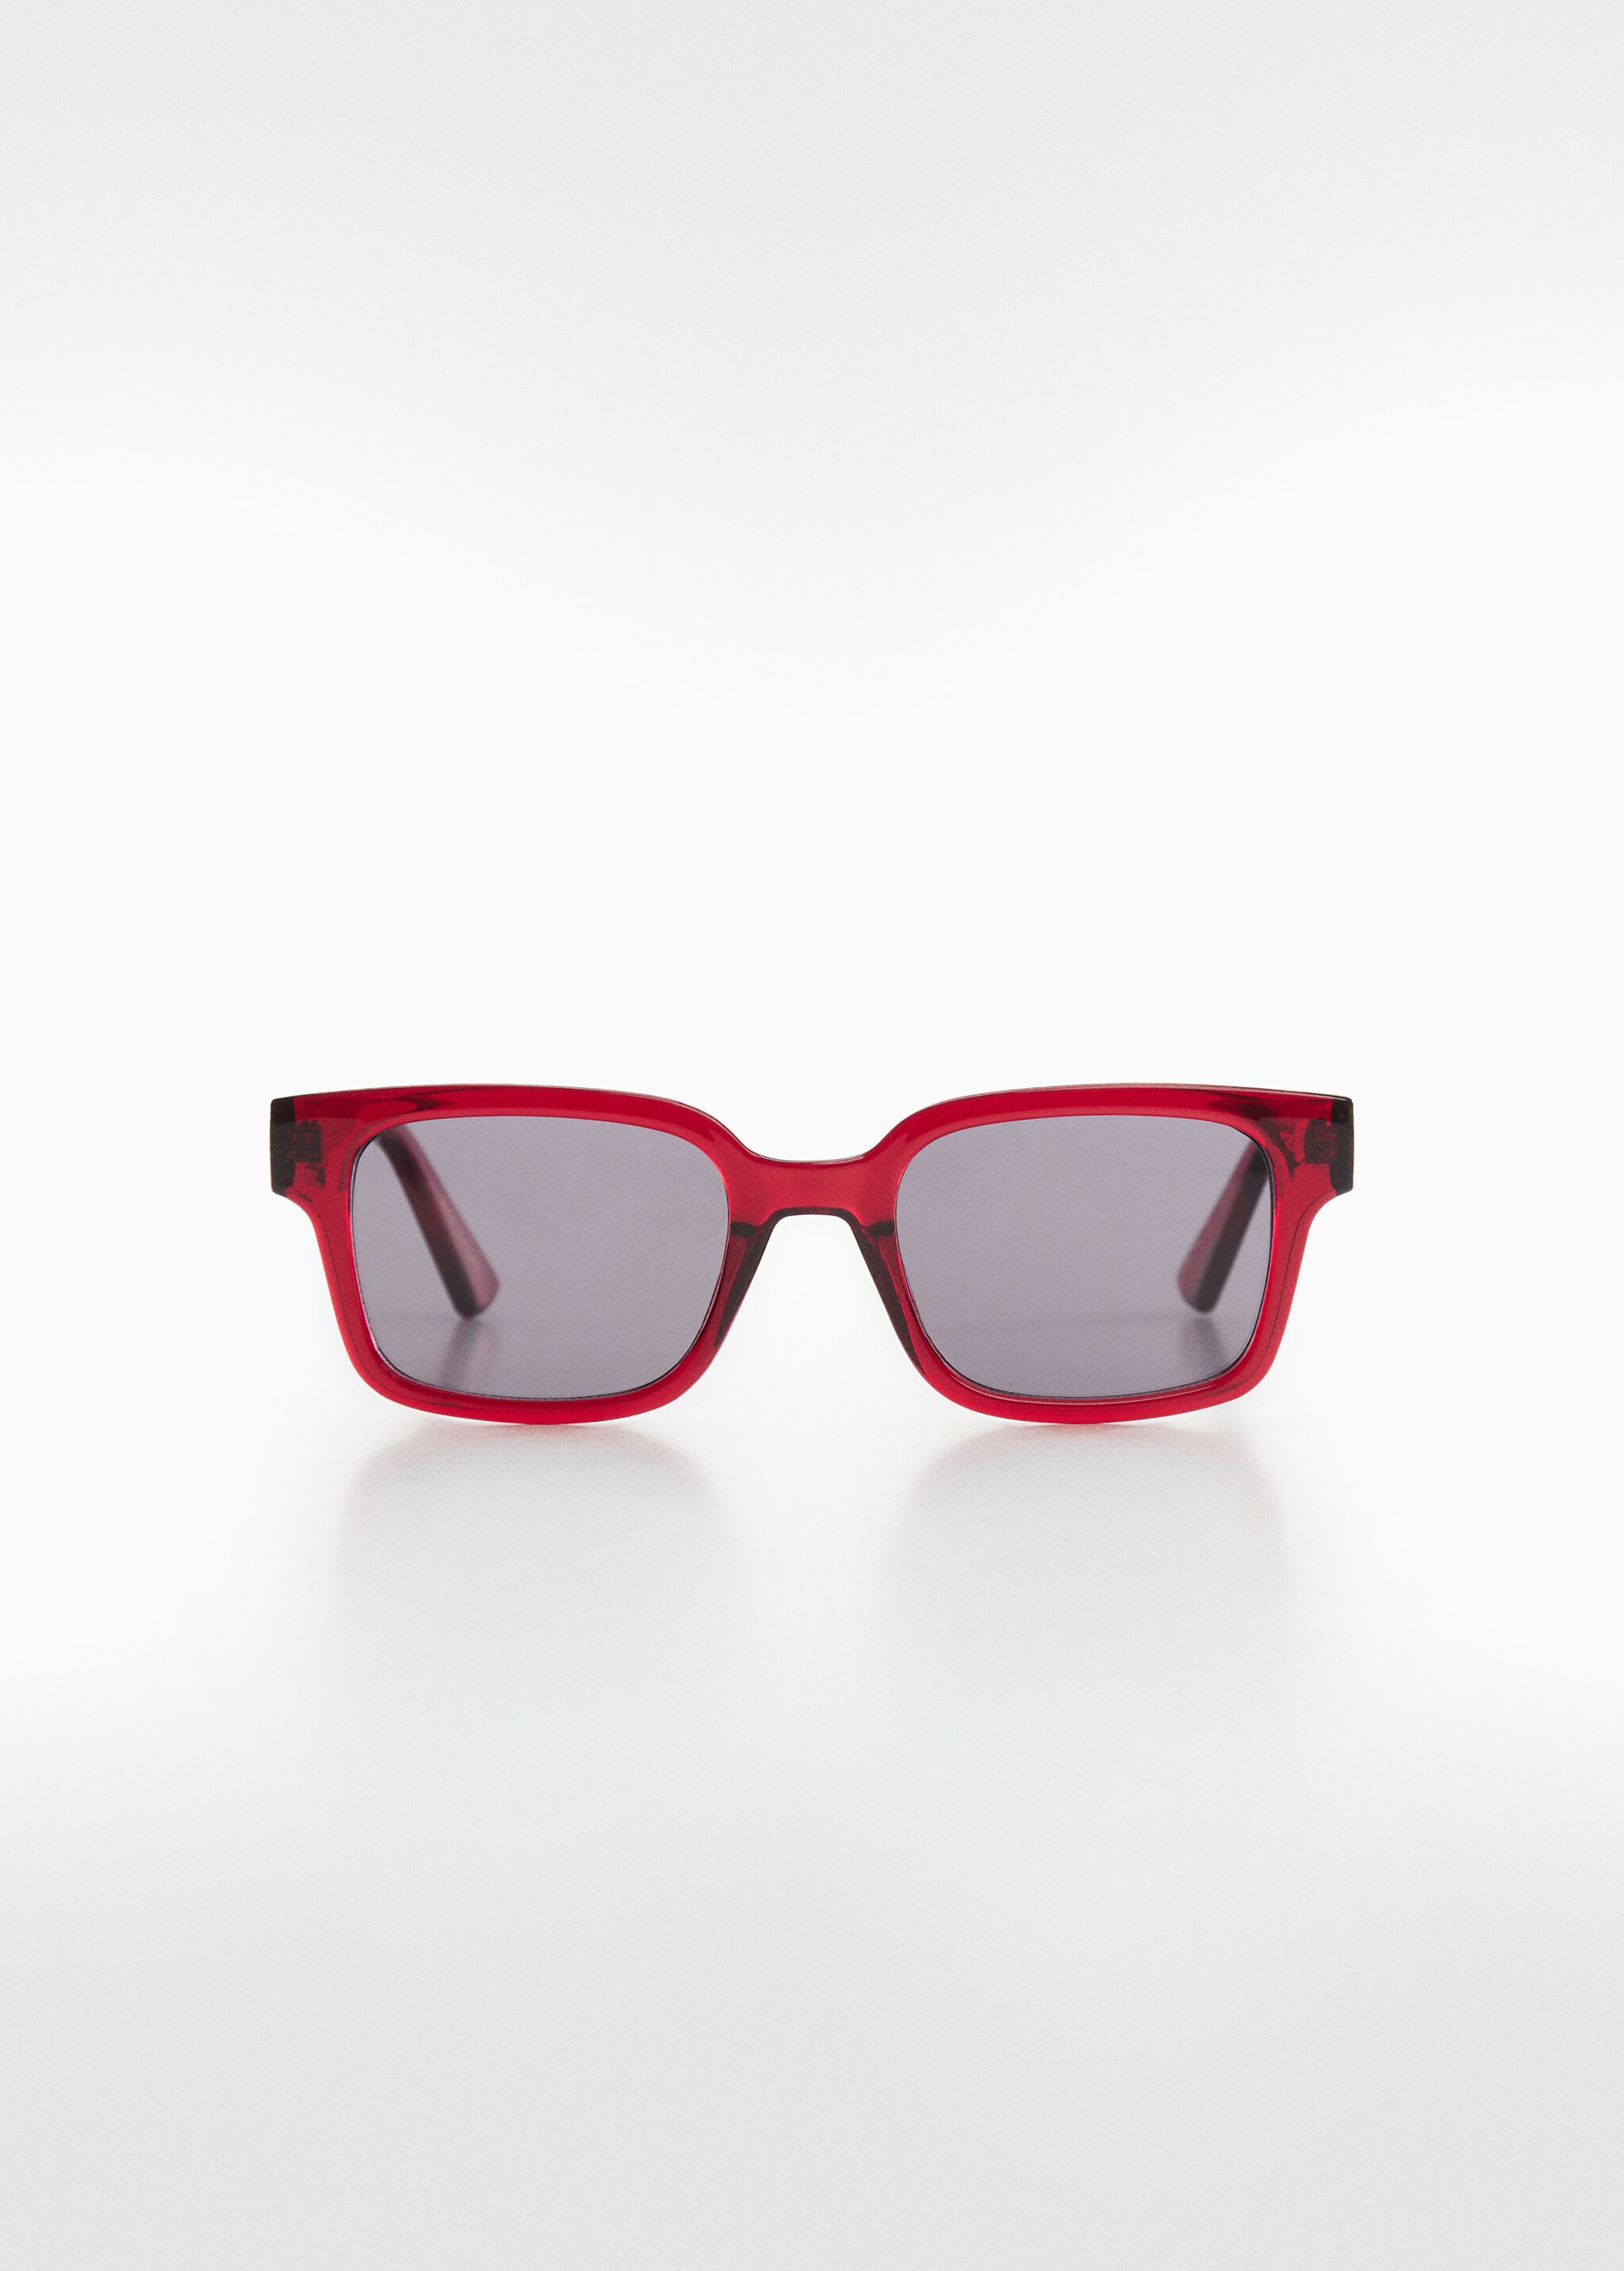 Square sunglasses - Article without model